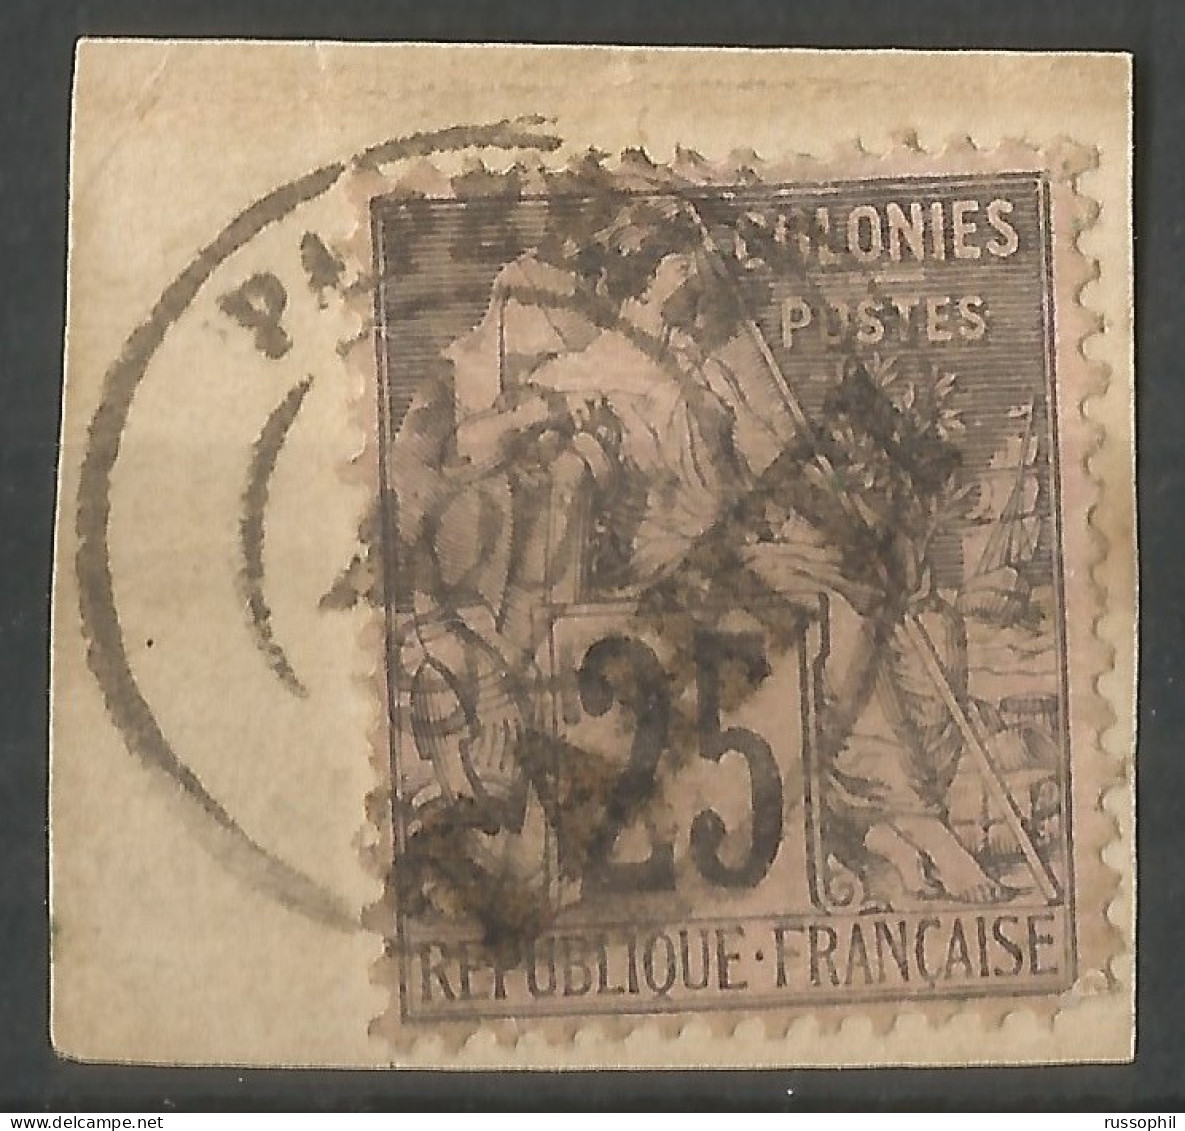 TAHITI - GENERAL COLONIES 25 CENT. OVERCHARGED TAHITI  (Yv. #15) ON FRAGMENT - 1894 - Usados